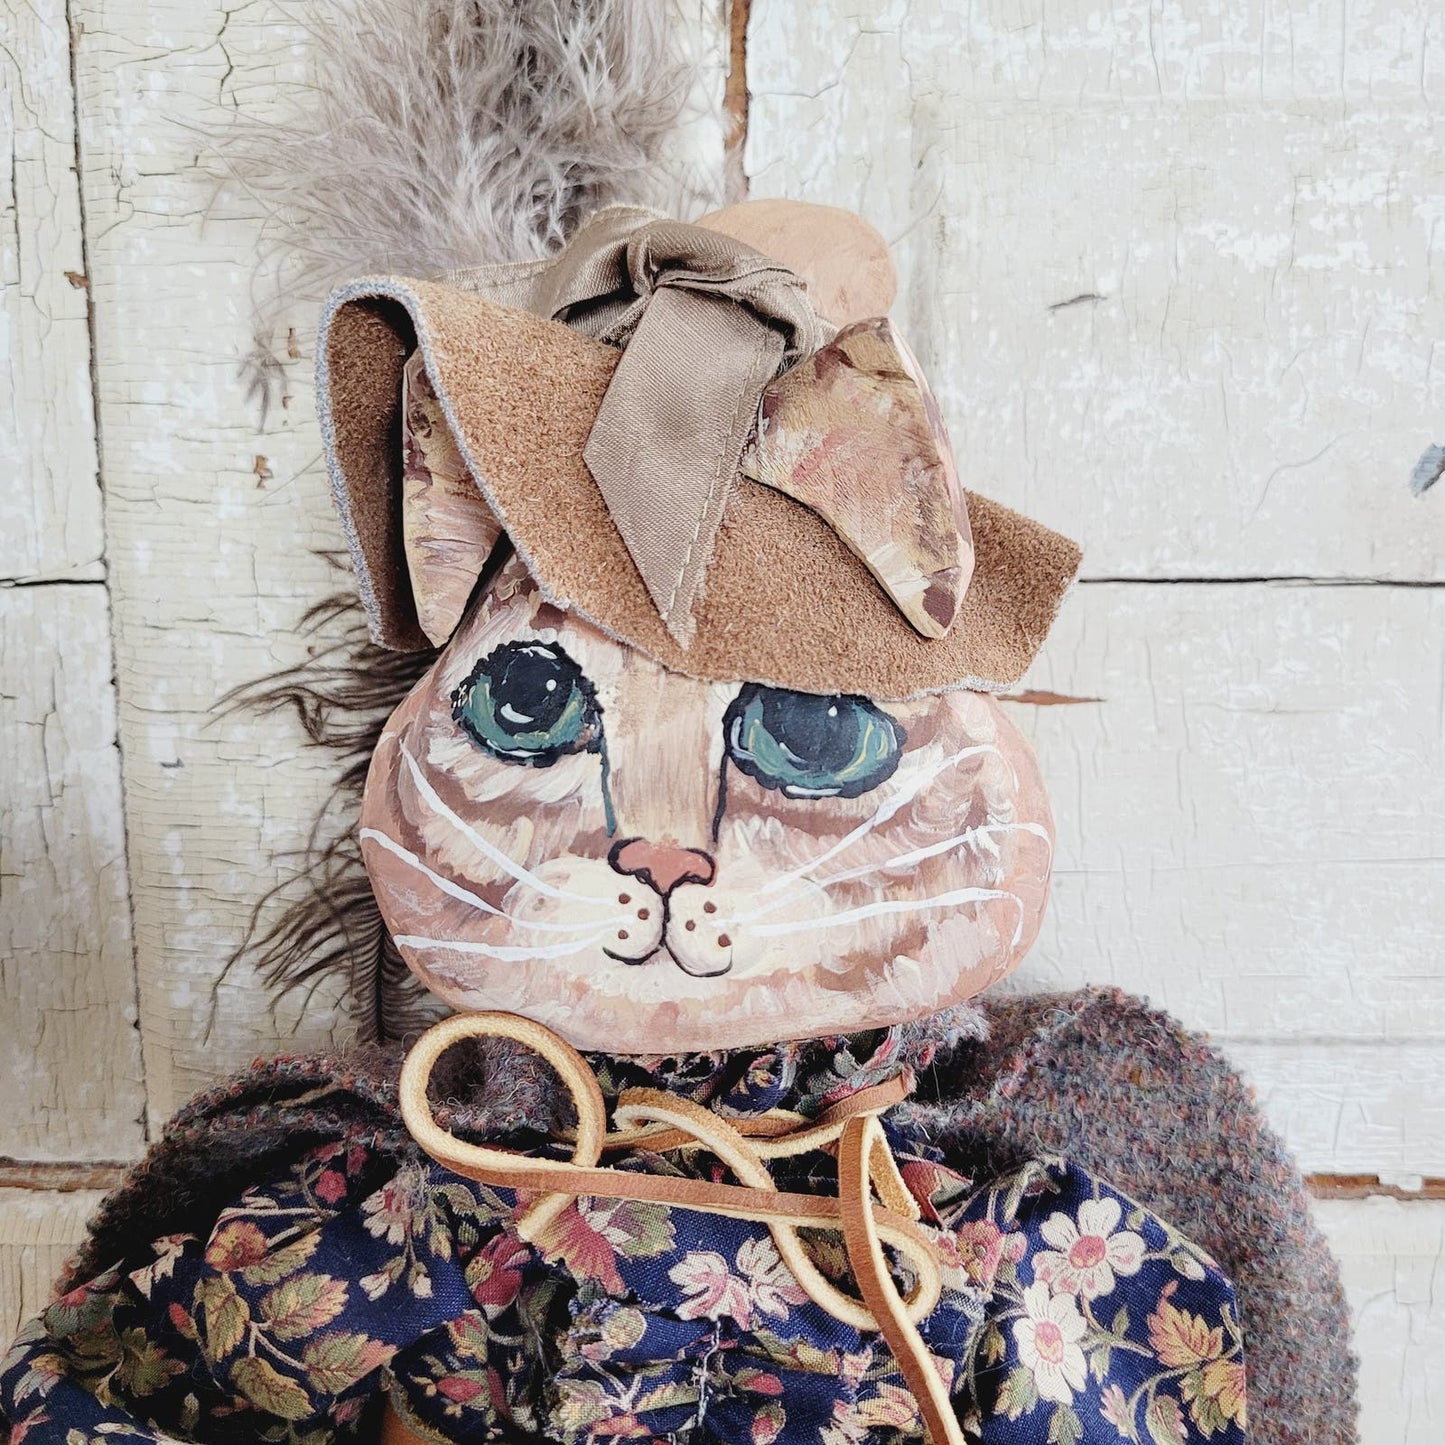 Handmade Hand-Painted Puss 'n Boots Doll - 22" Tall - Vintage Collectible